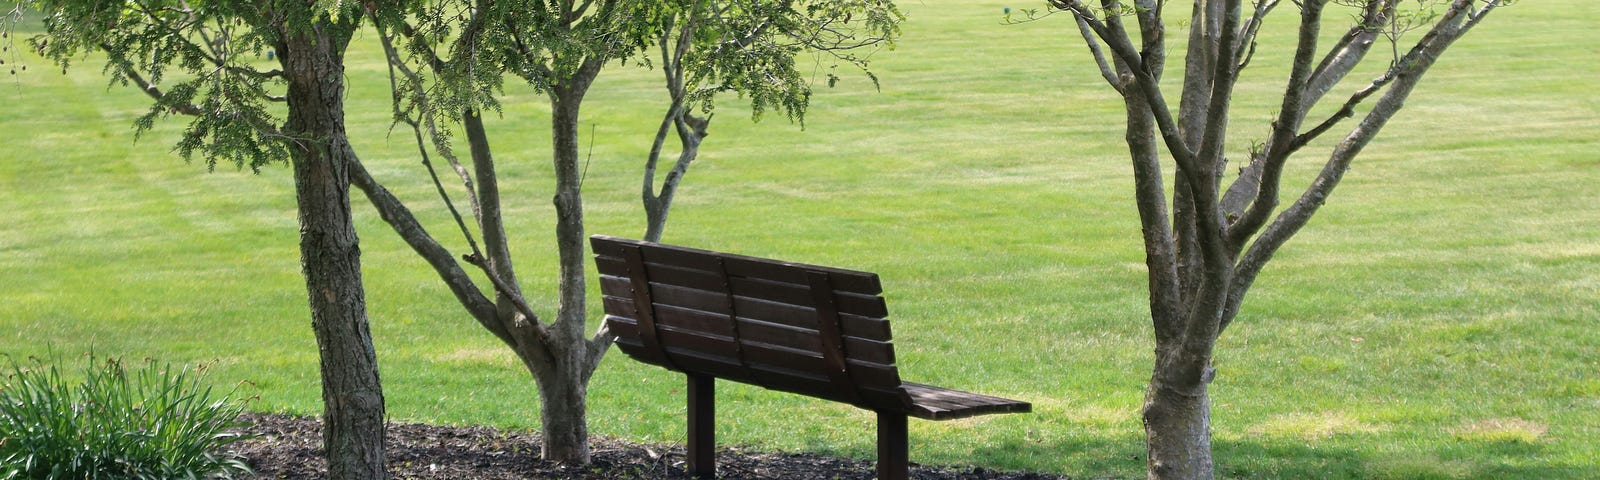 An empty bench in a park surrounded with 3 small trees